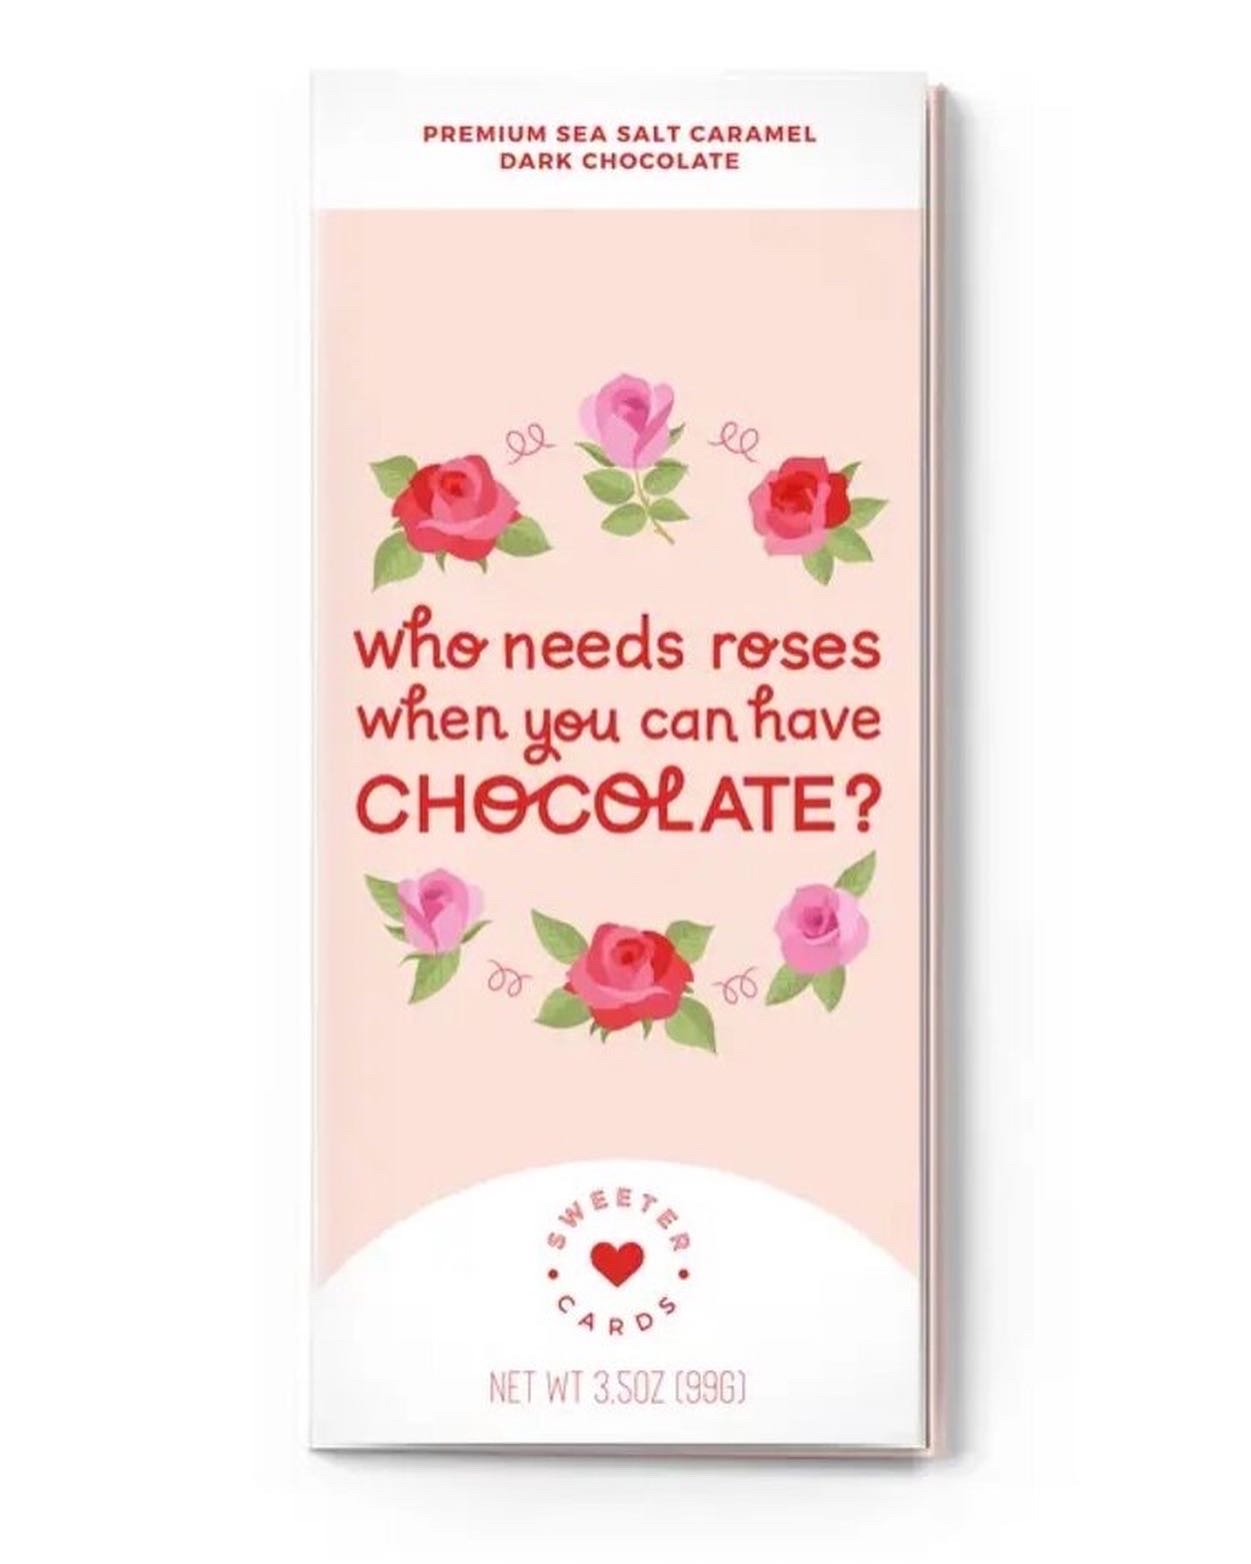 Galentine's Chocolate Bar and Card in One